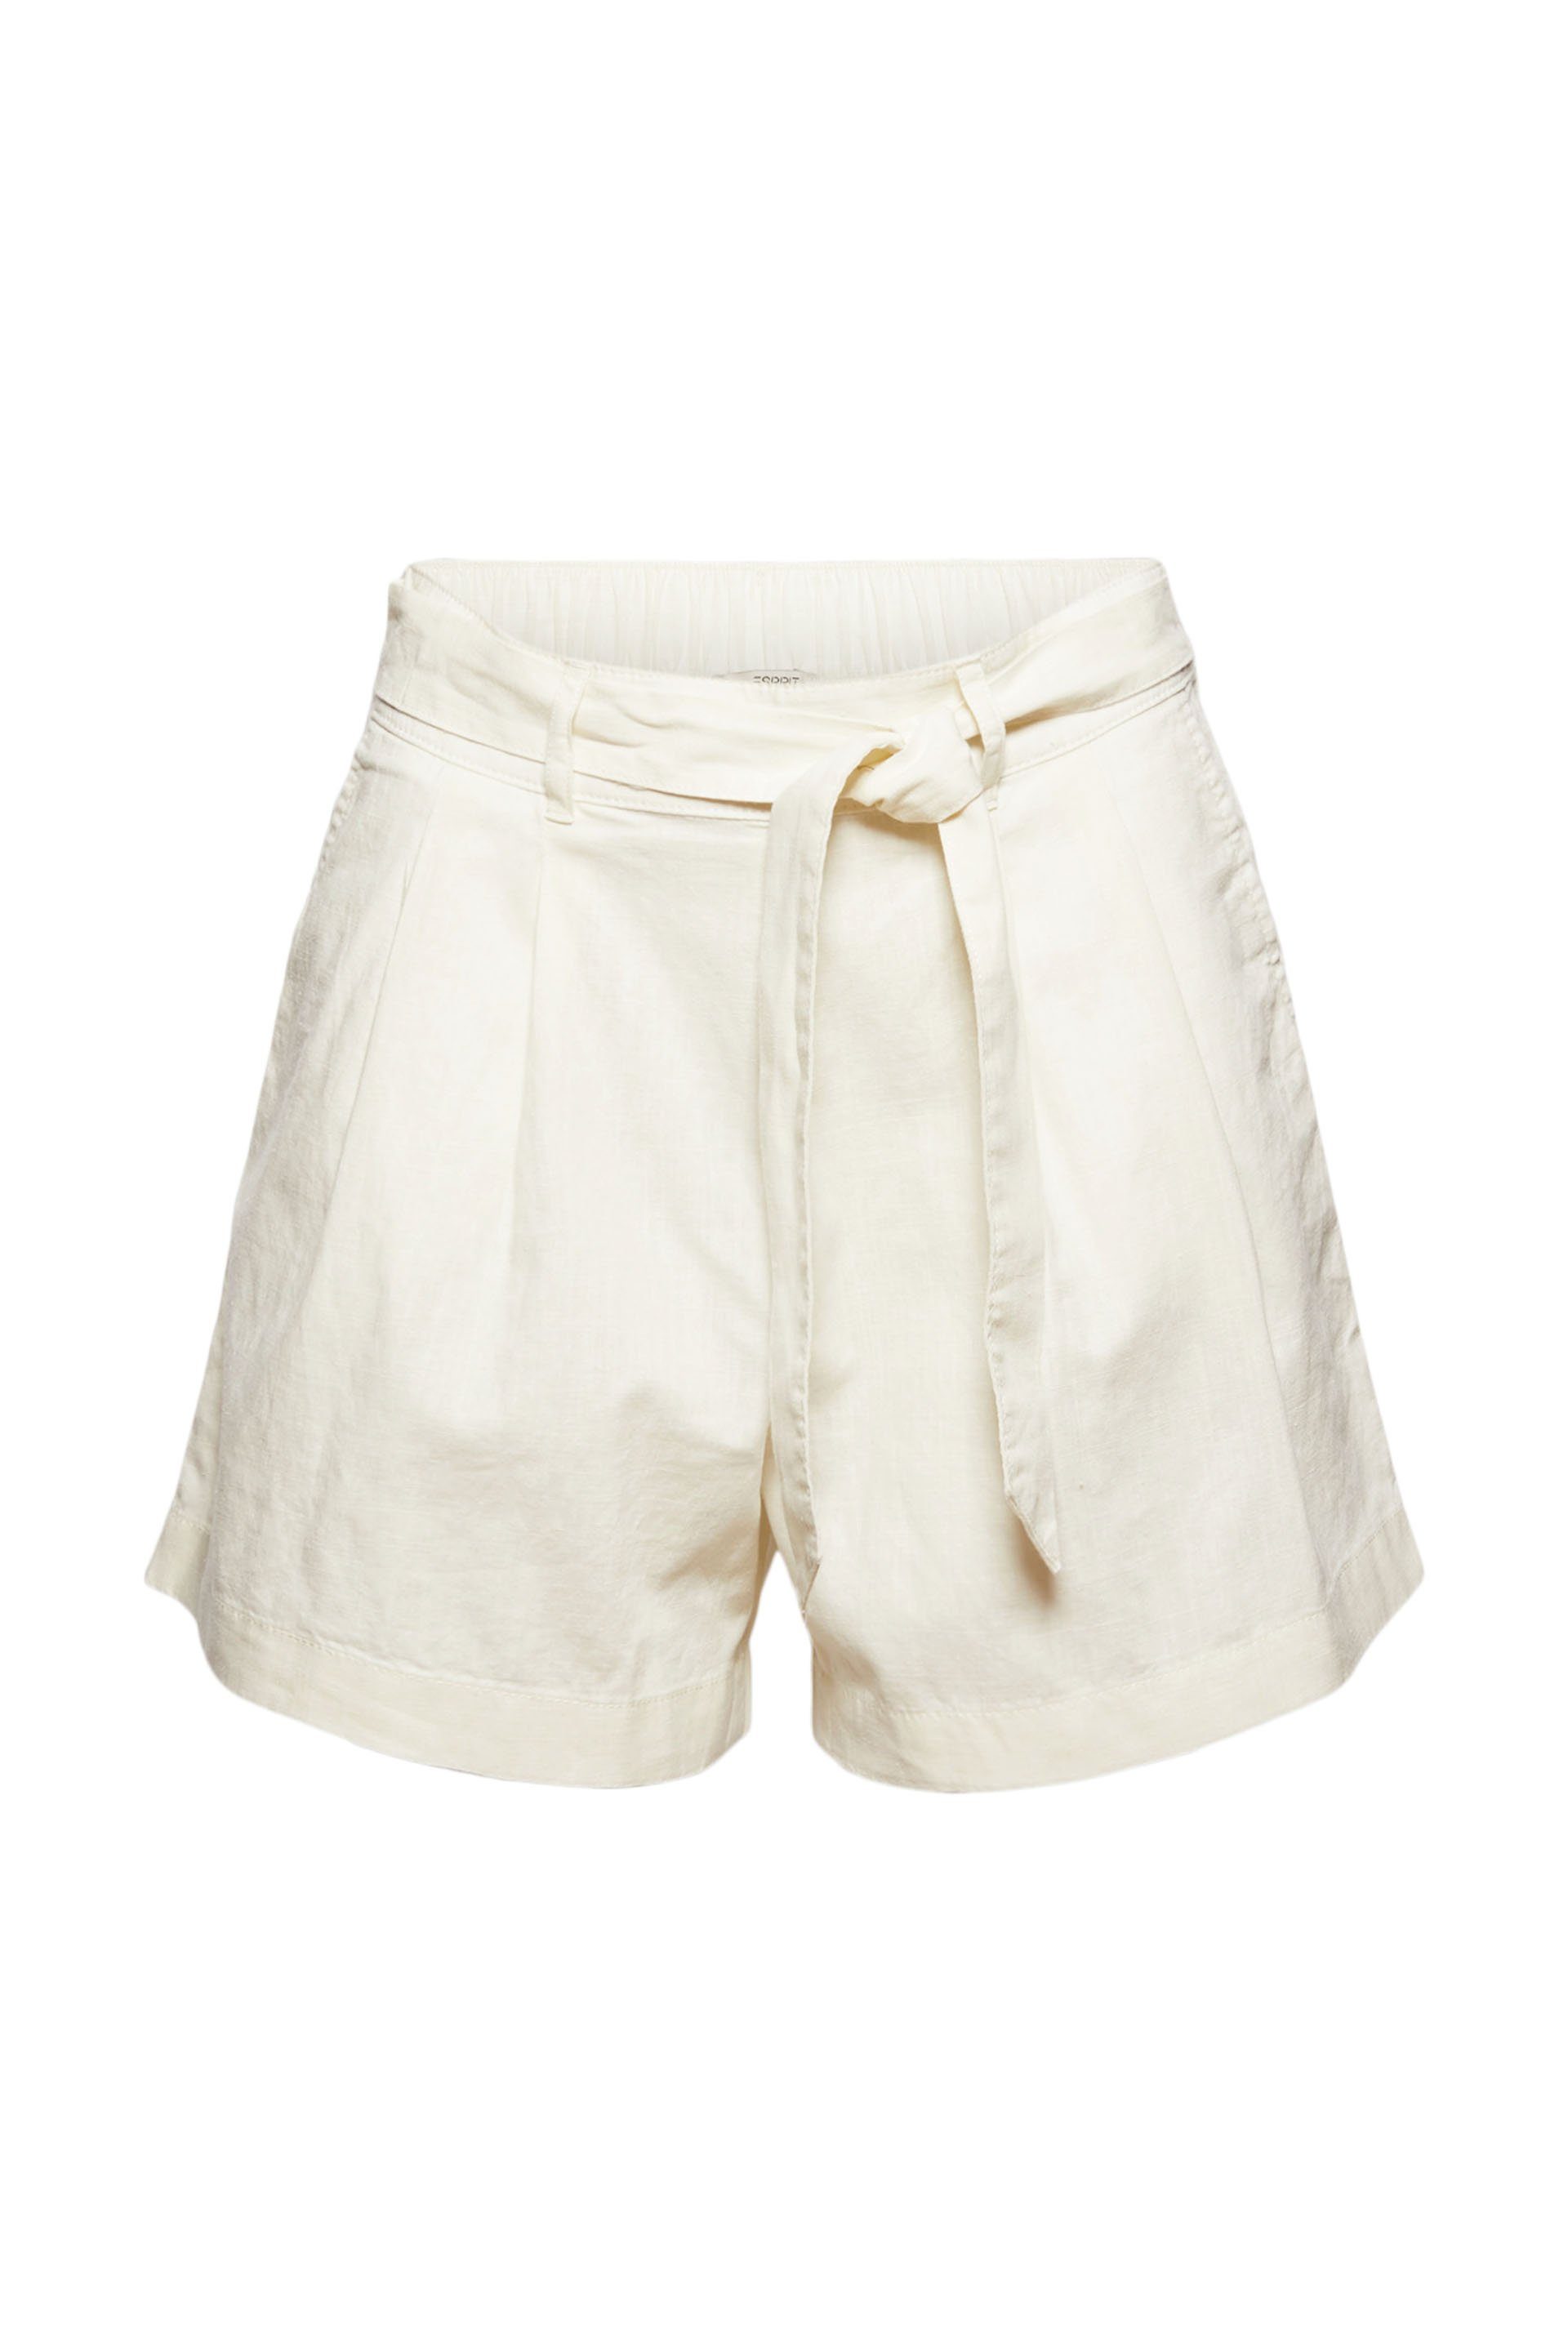 Collection Shorts Esprit white off